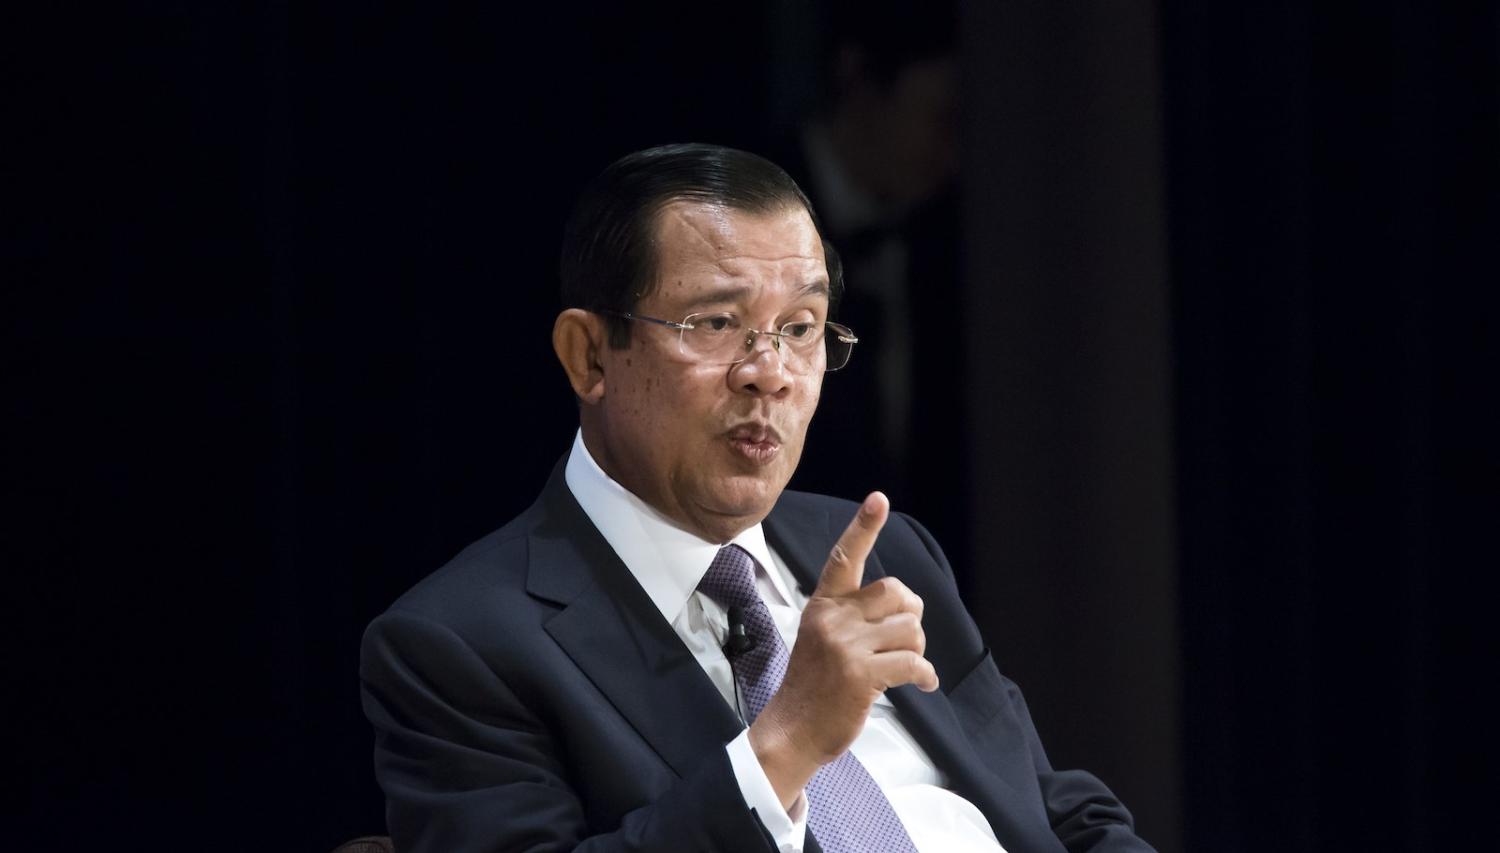 Cambodian Prime Minister Hun Sen at the Future of Asia Conference, Tokyo, 30 May 2019 (Photo: Tomohiro Ohsumi/Getty Images)